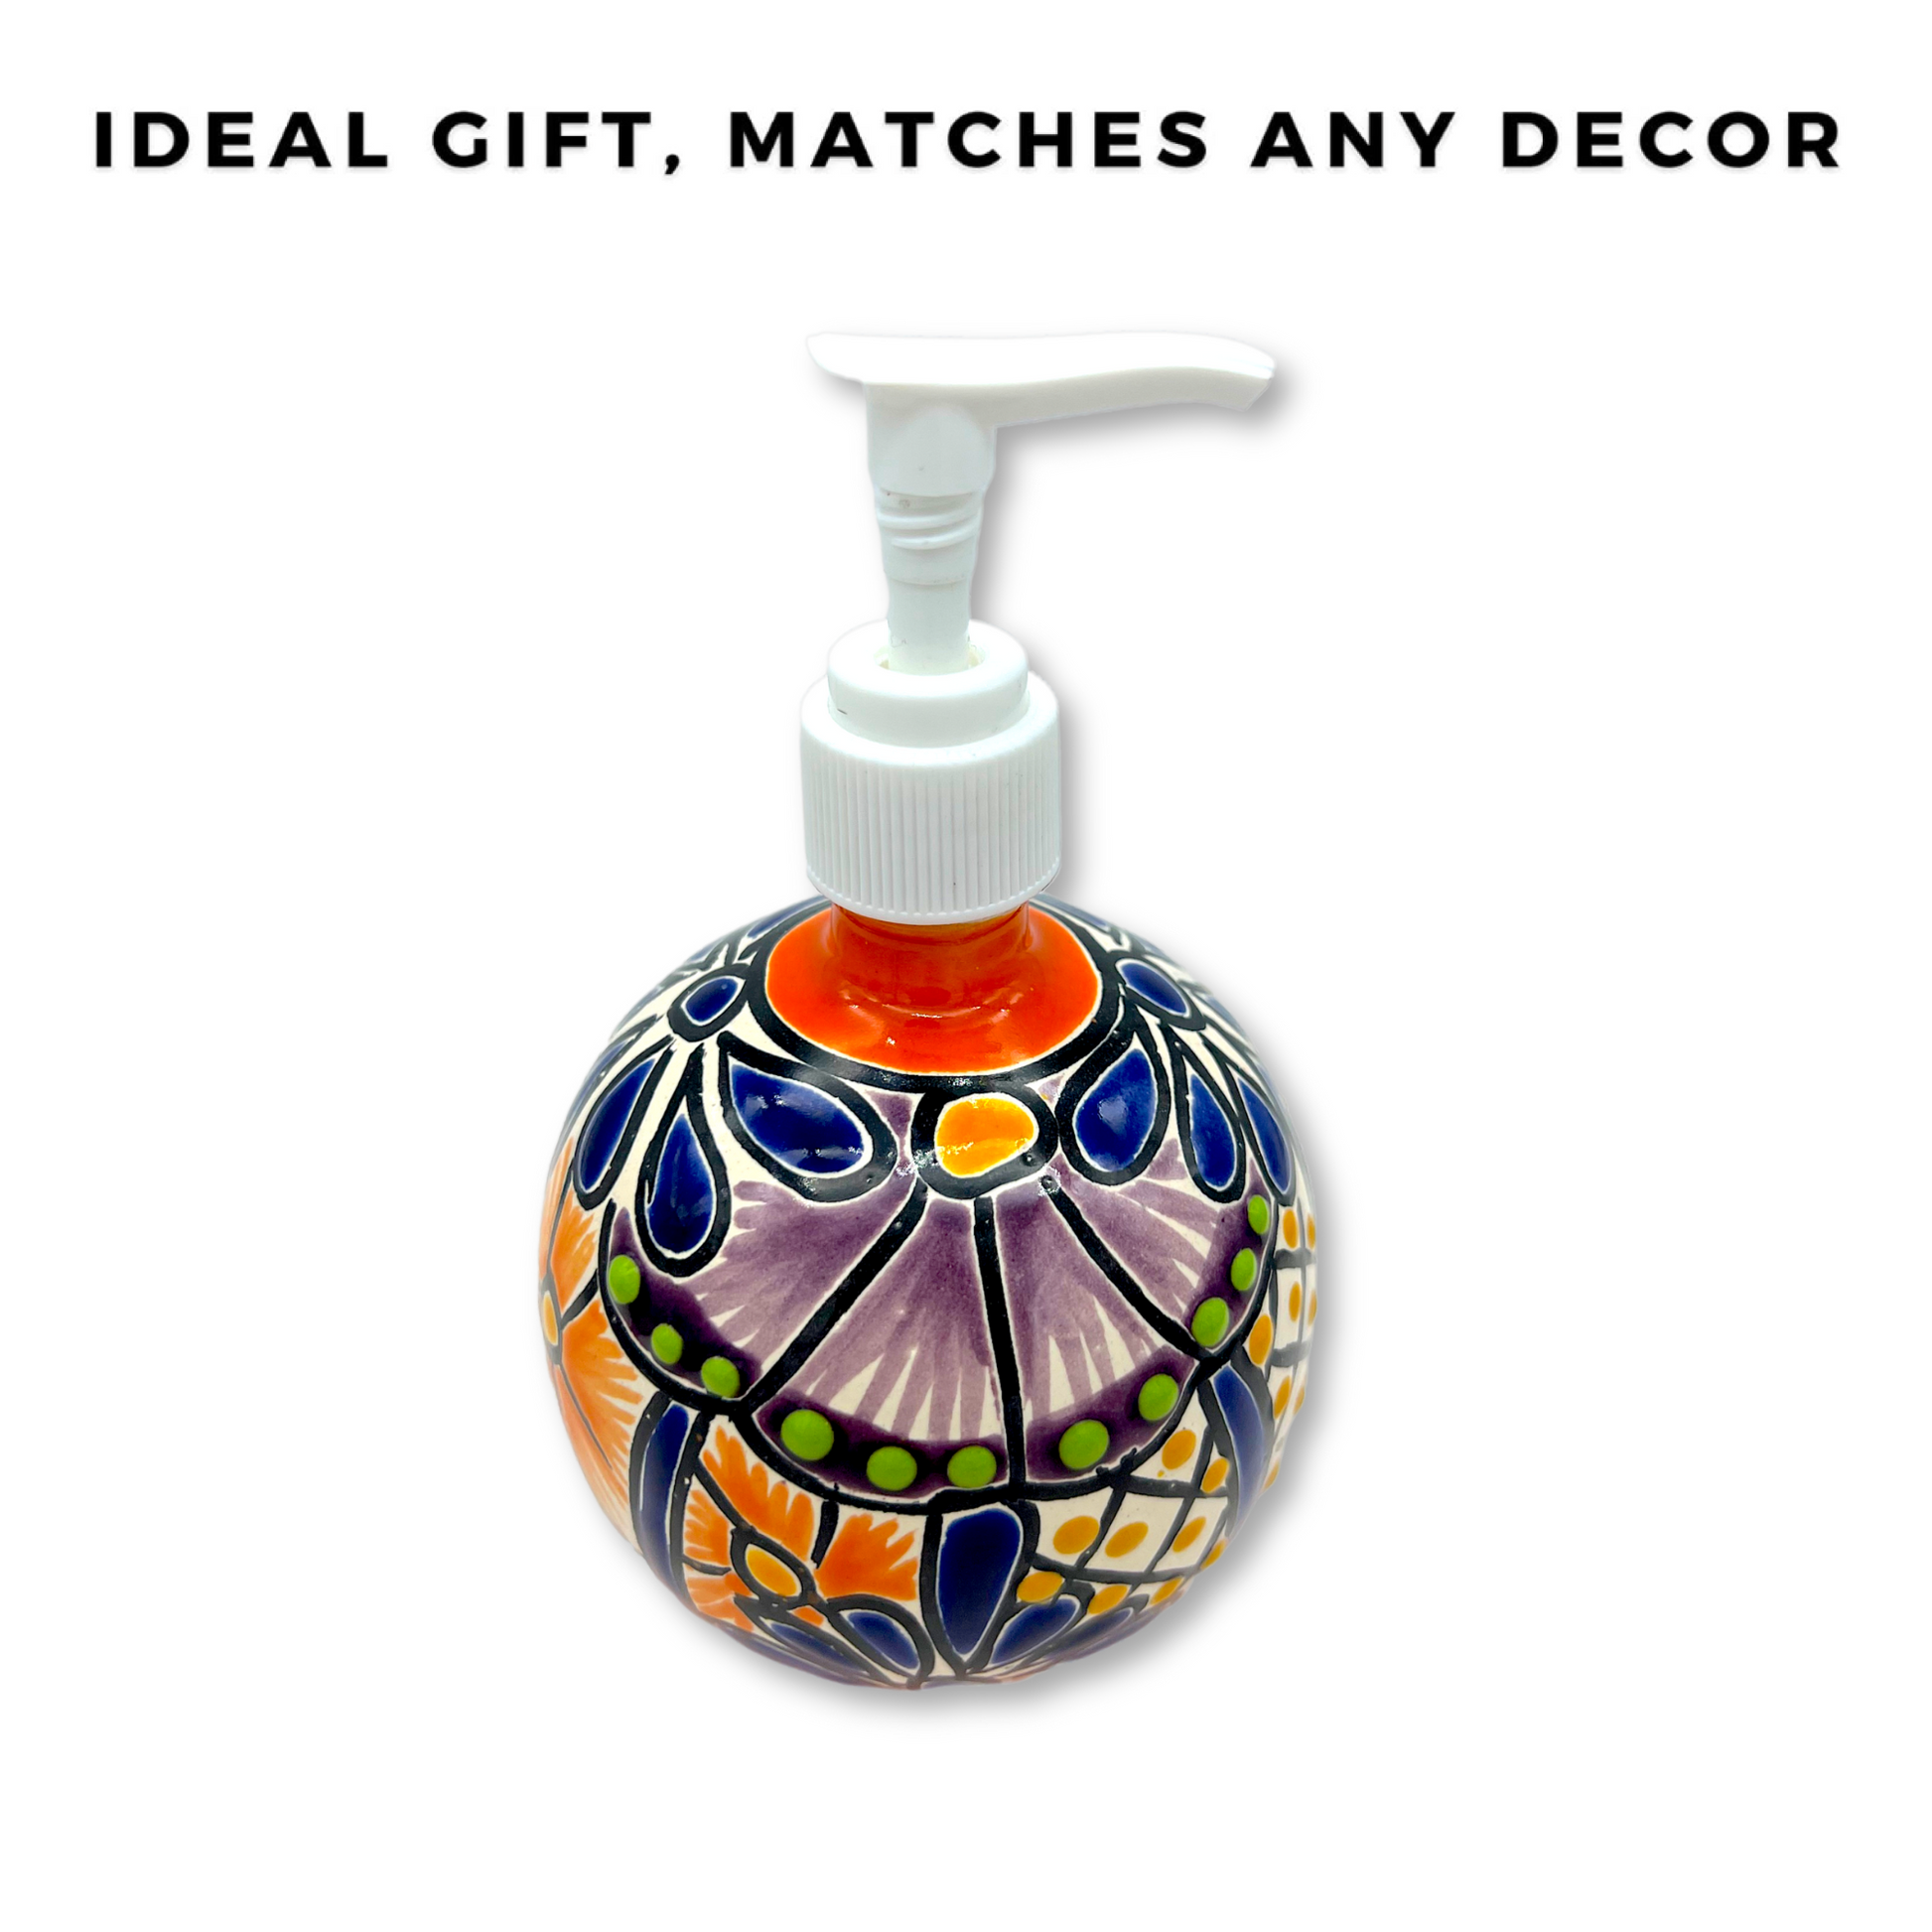 front view of Hand-painted Talavera Ceramic Soap Dispenser in vibrant colors, an artistic addition to kitchen or bathroom.